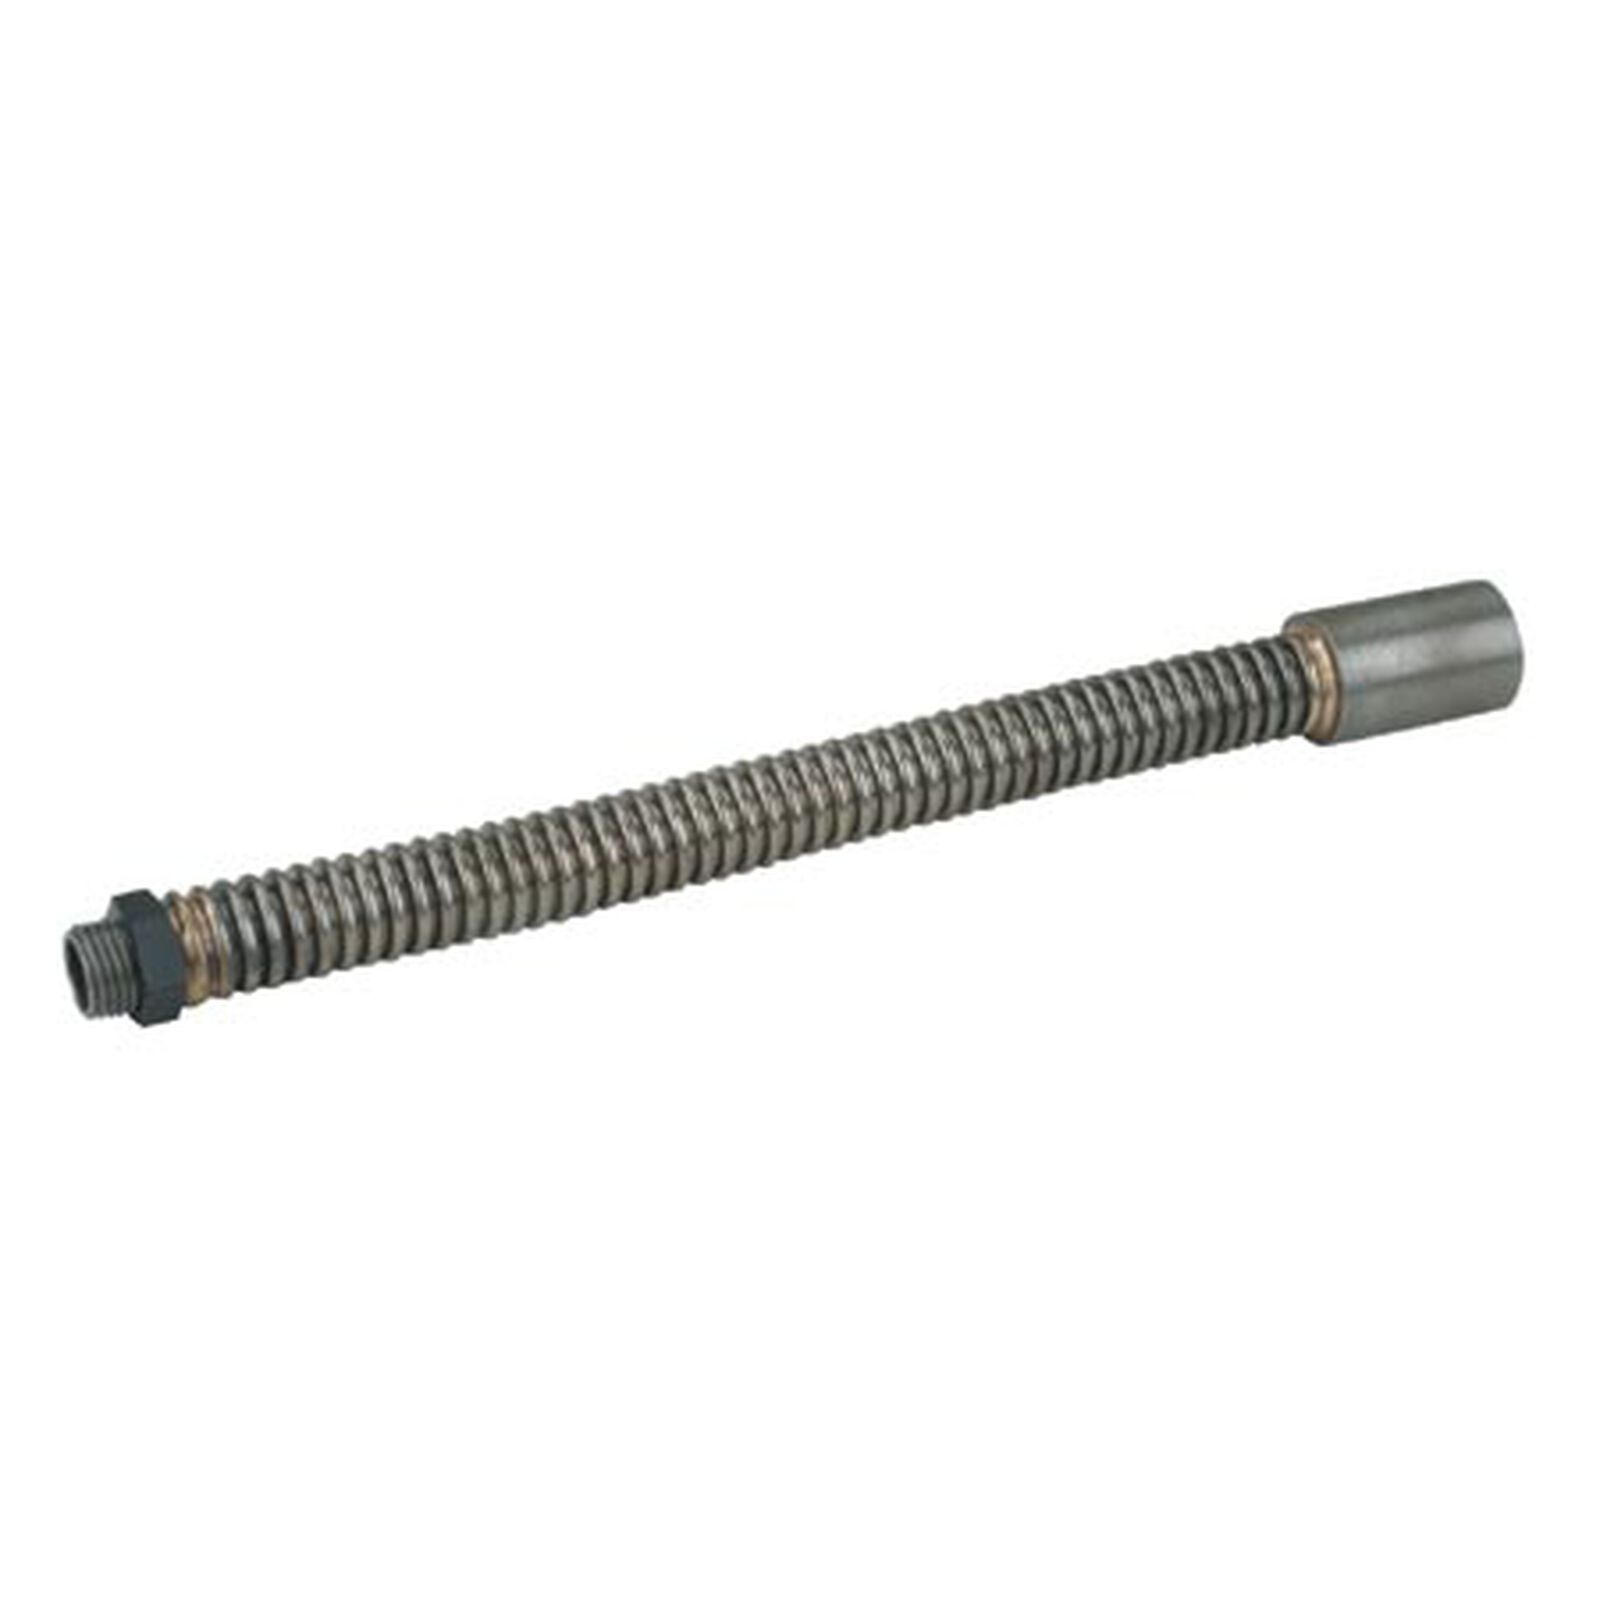 Flex Exh Pipe with Nut: 50-56